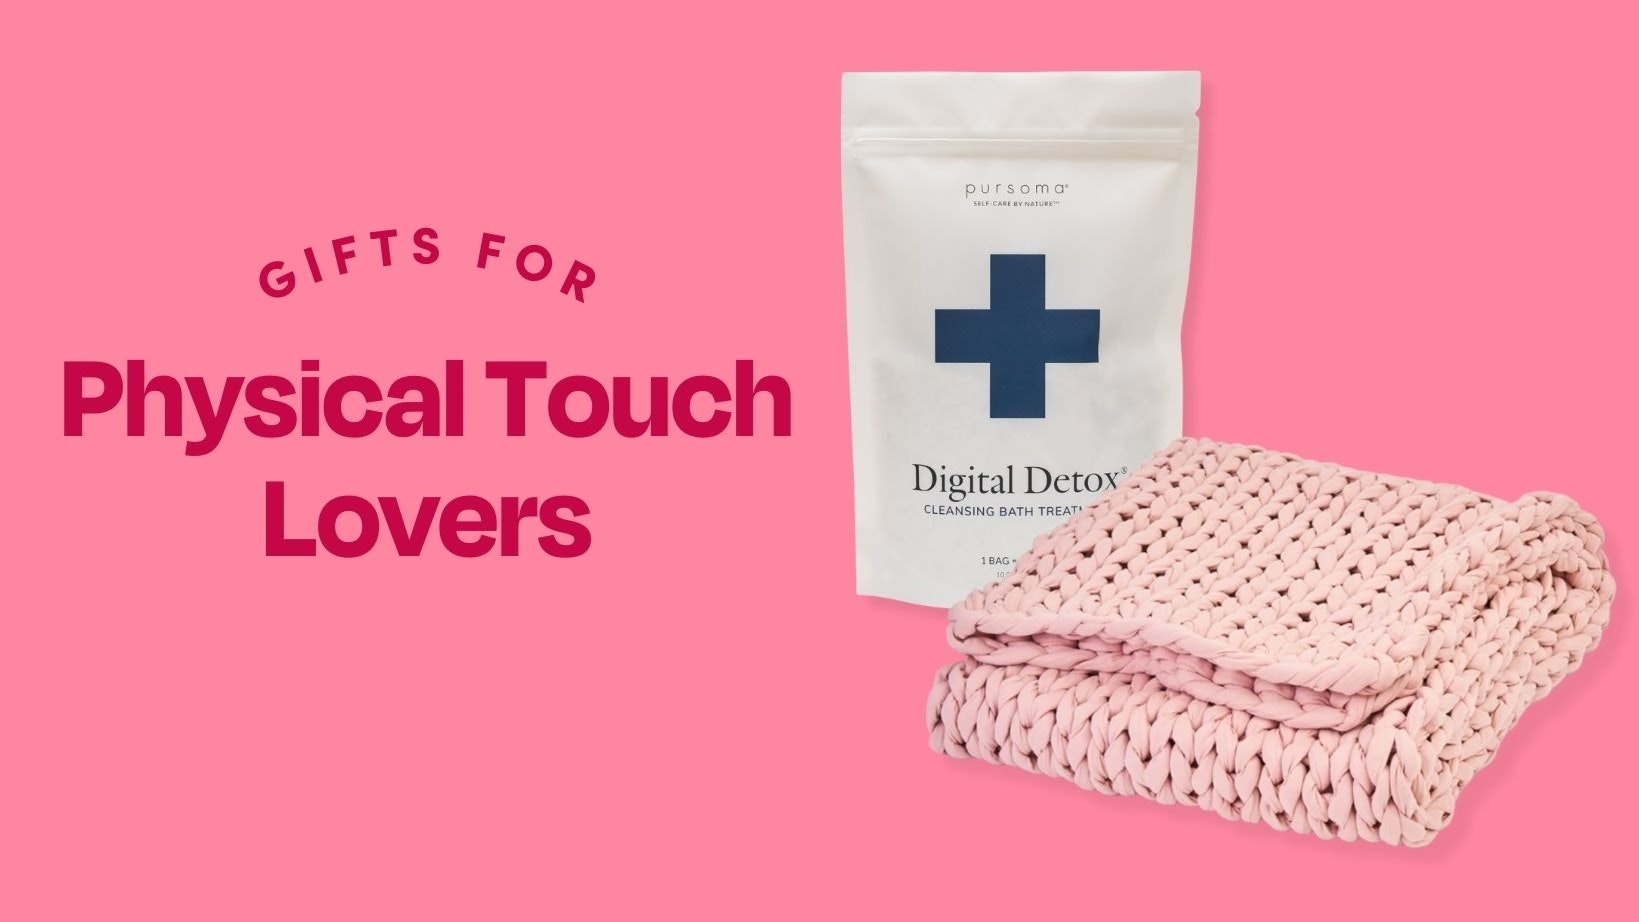 Gifts for Physical Touch Lovers